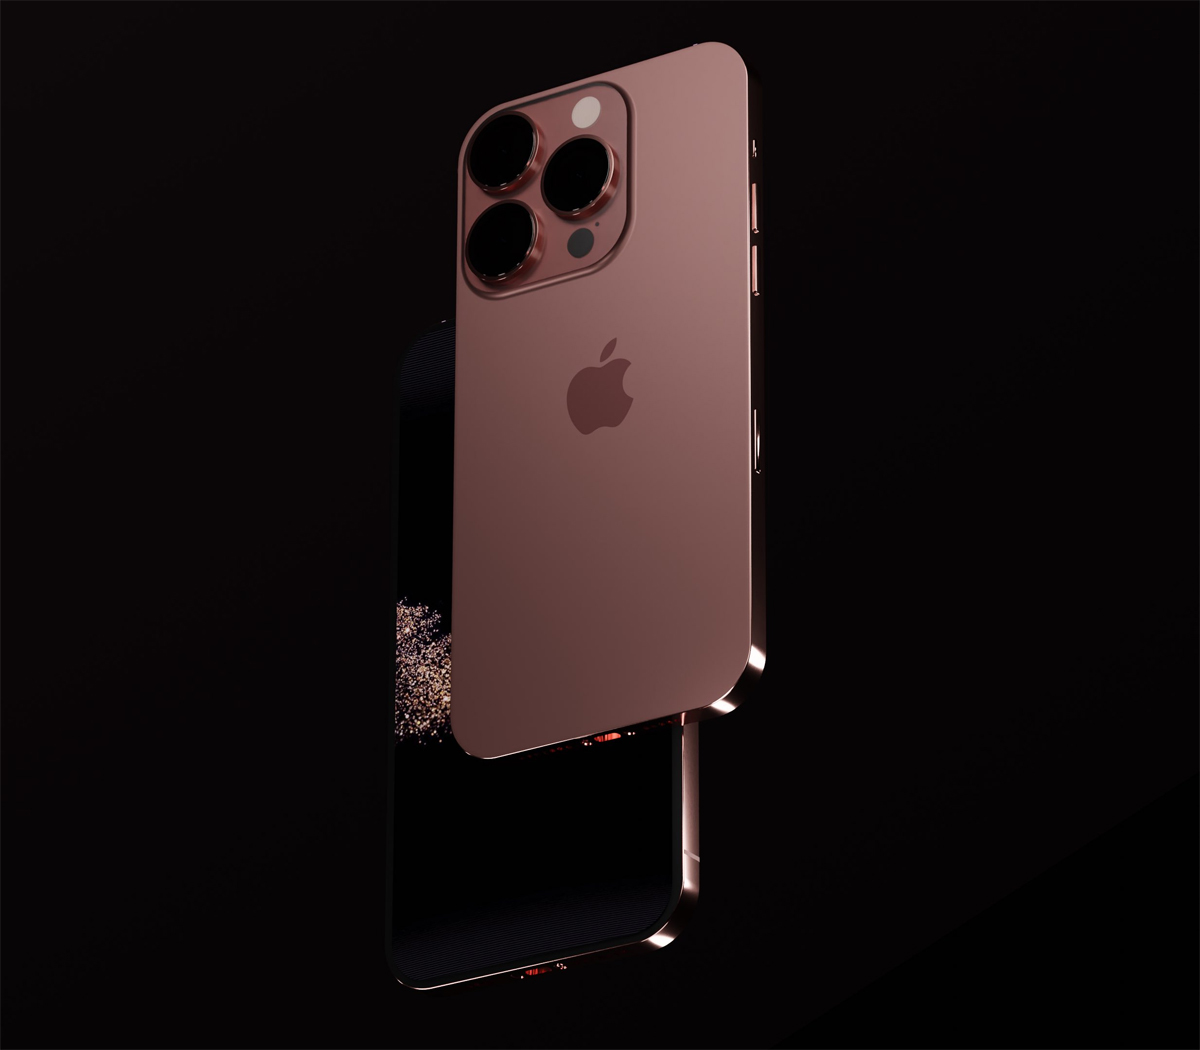 iPhone 14 Pro revealed an intoxicating pink concept